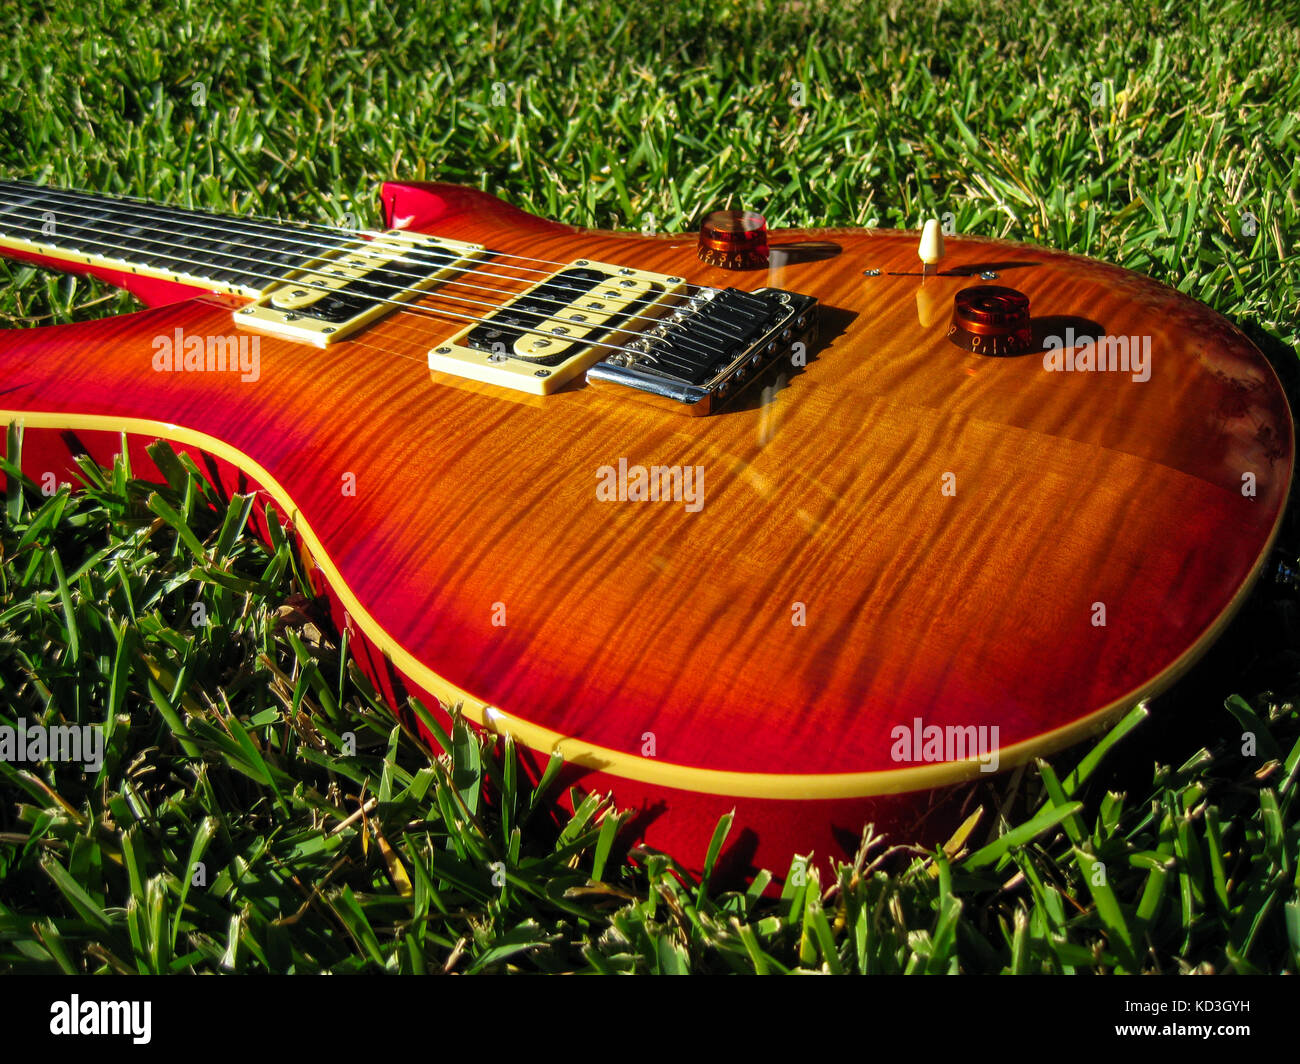 PRS Flame maple cherry burst guitar glowing in the afternoon sun. Stock Photo